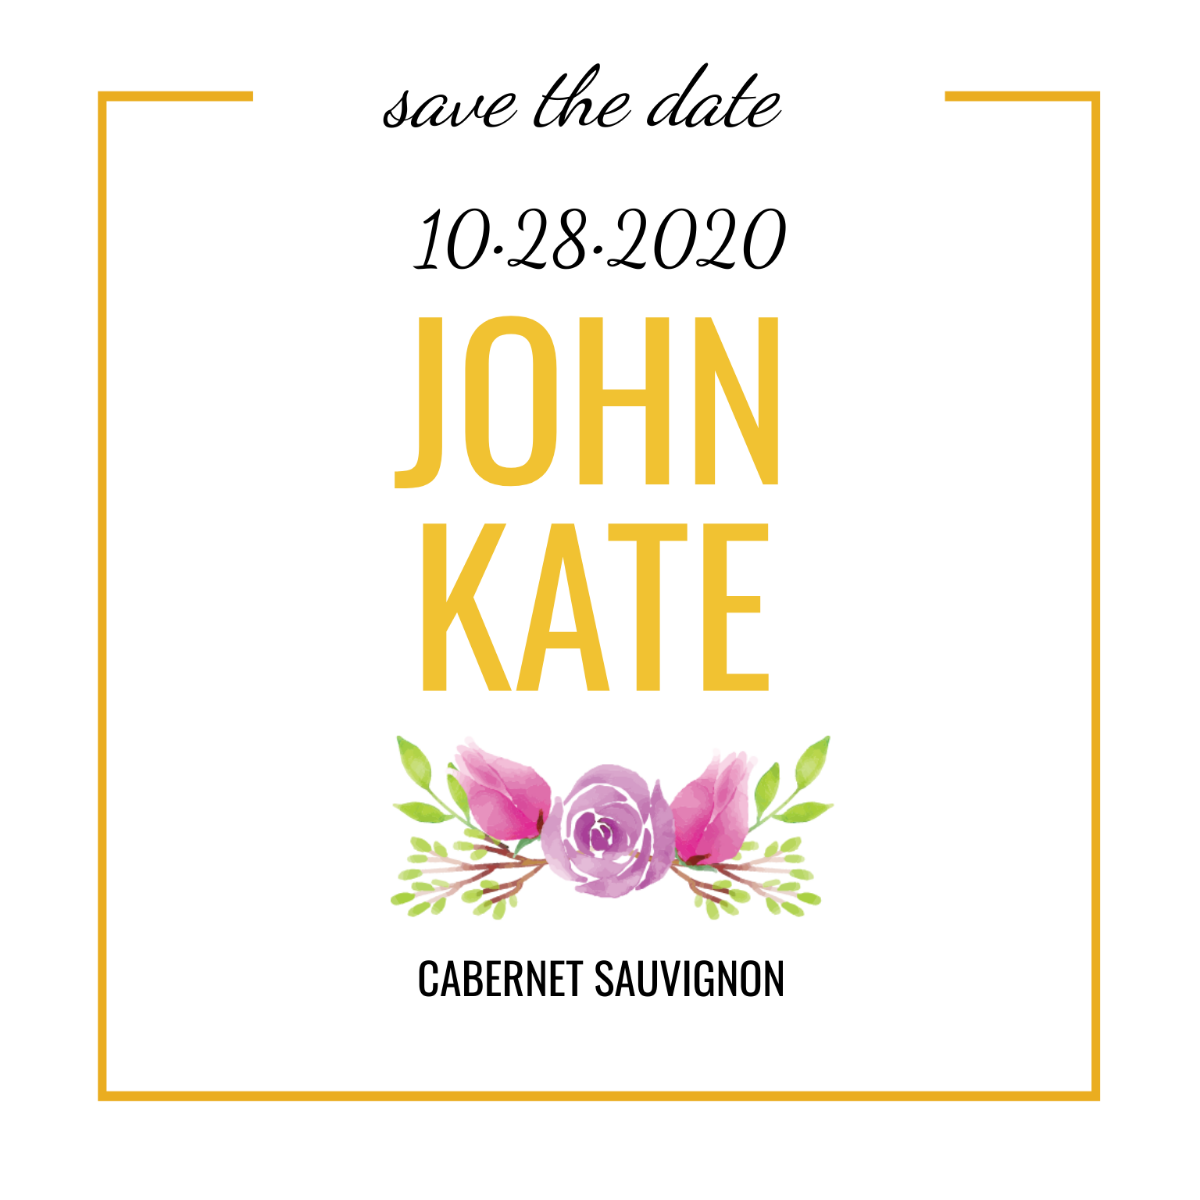 Save the Date Wine Label Template